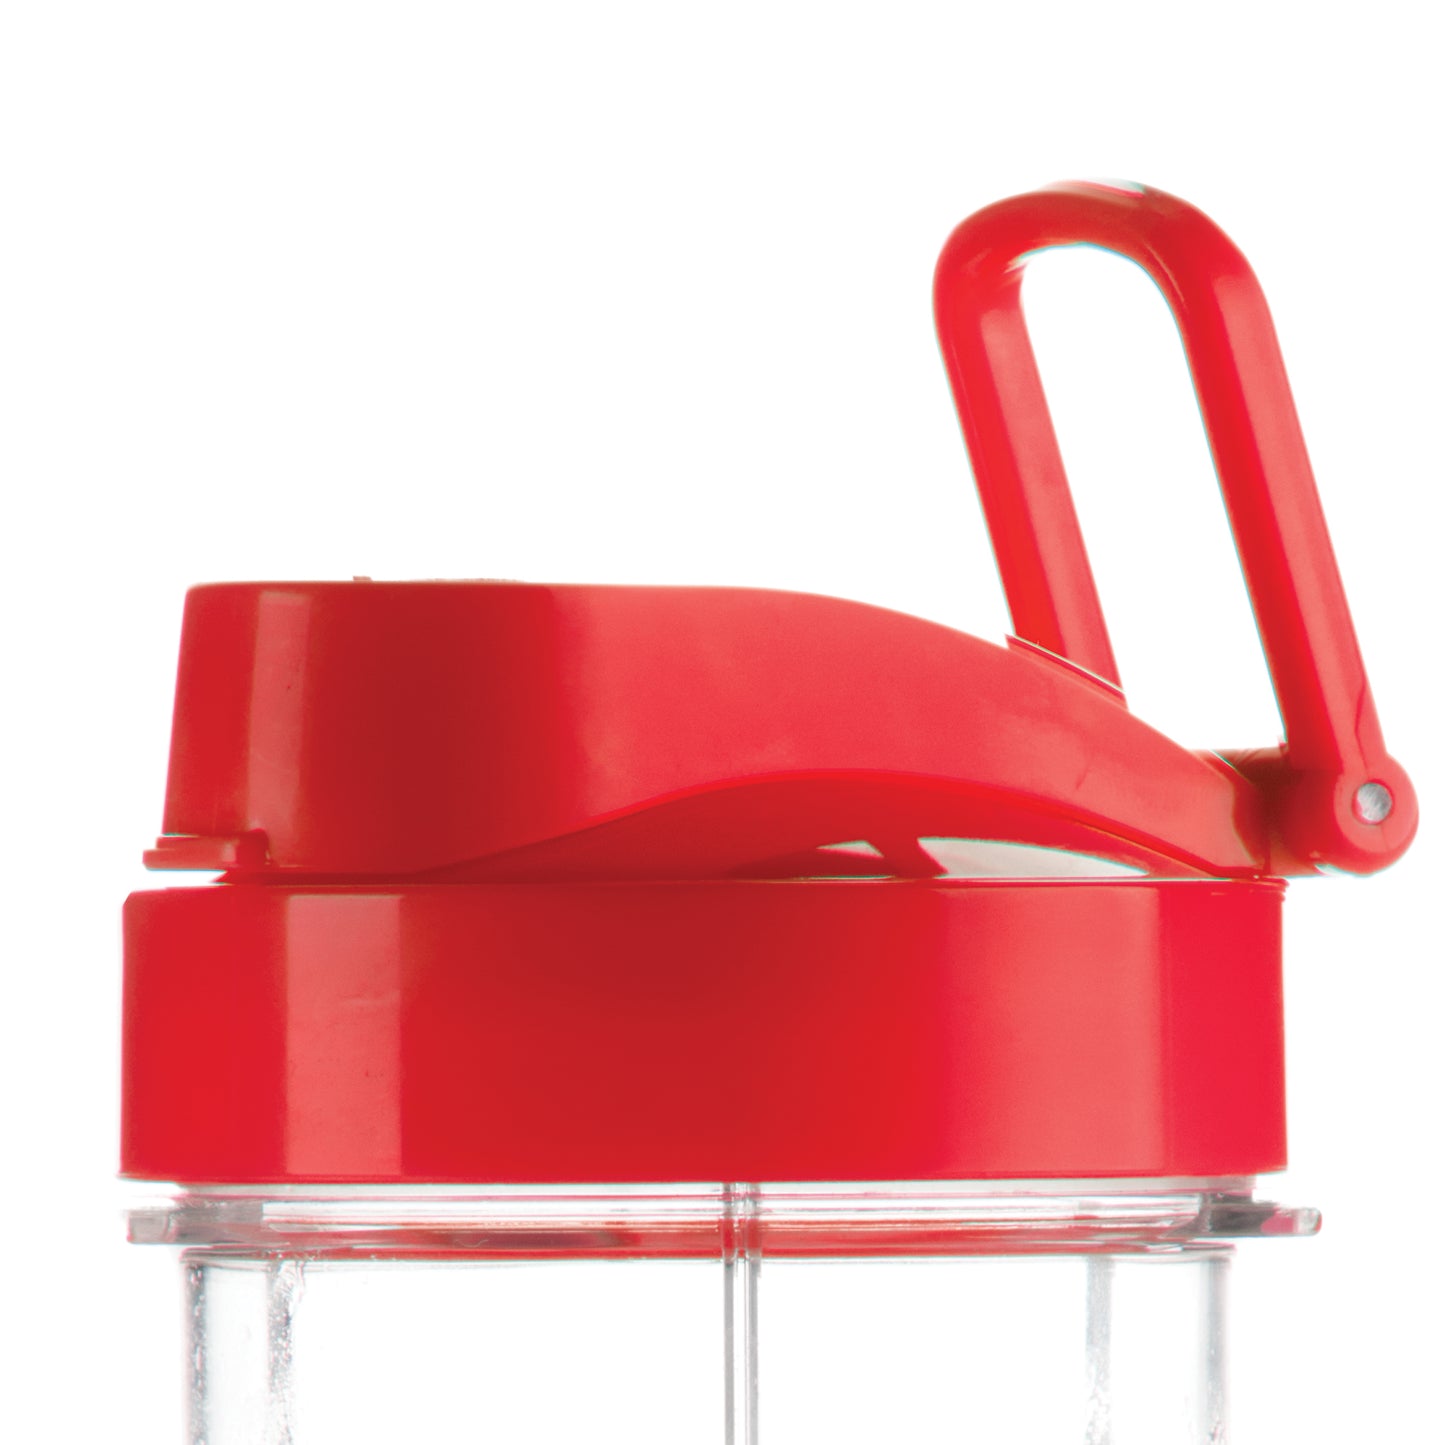 P002851 - Cup for smoothie maker 99330, 9931, 99336, red